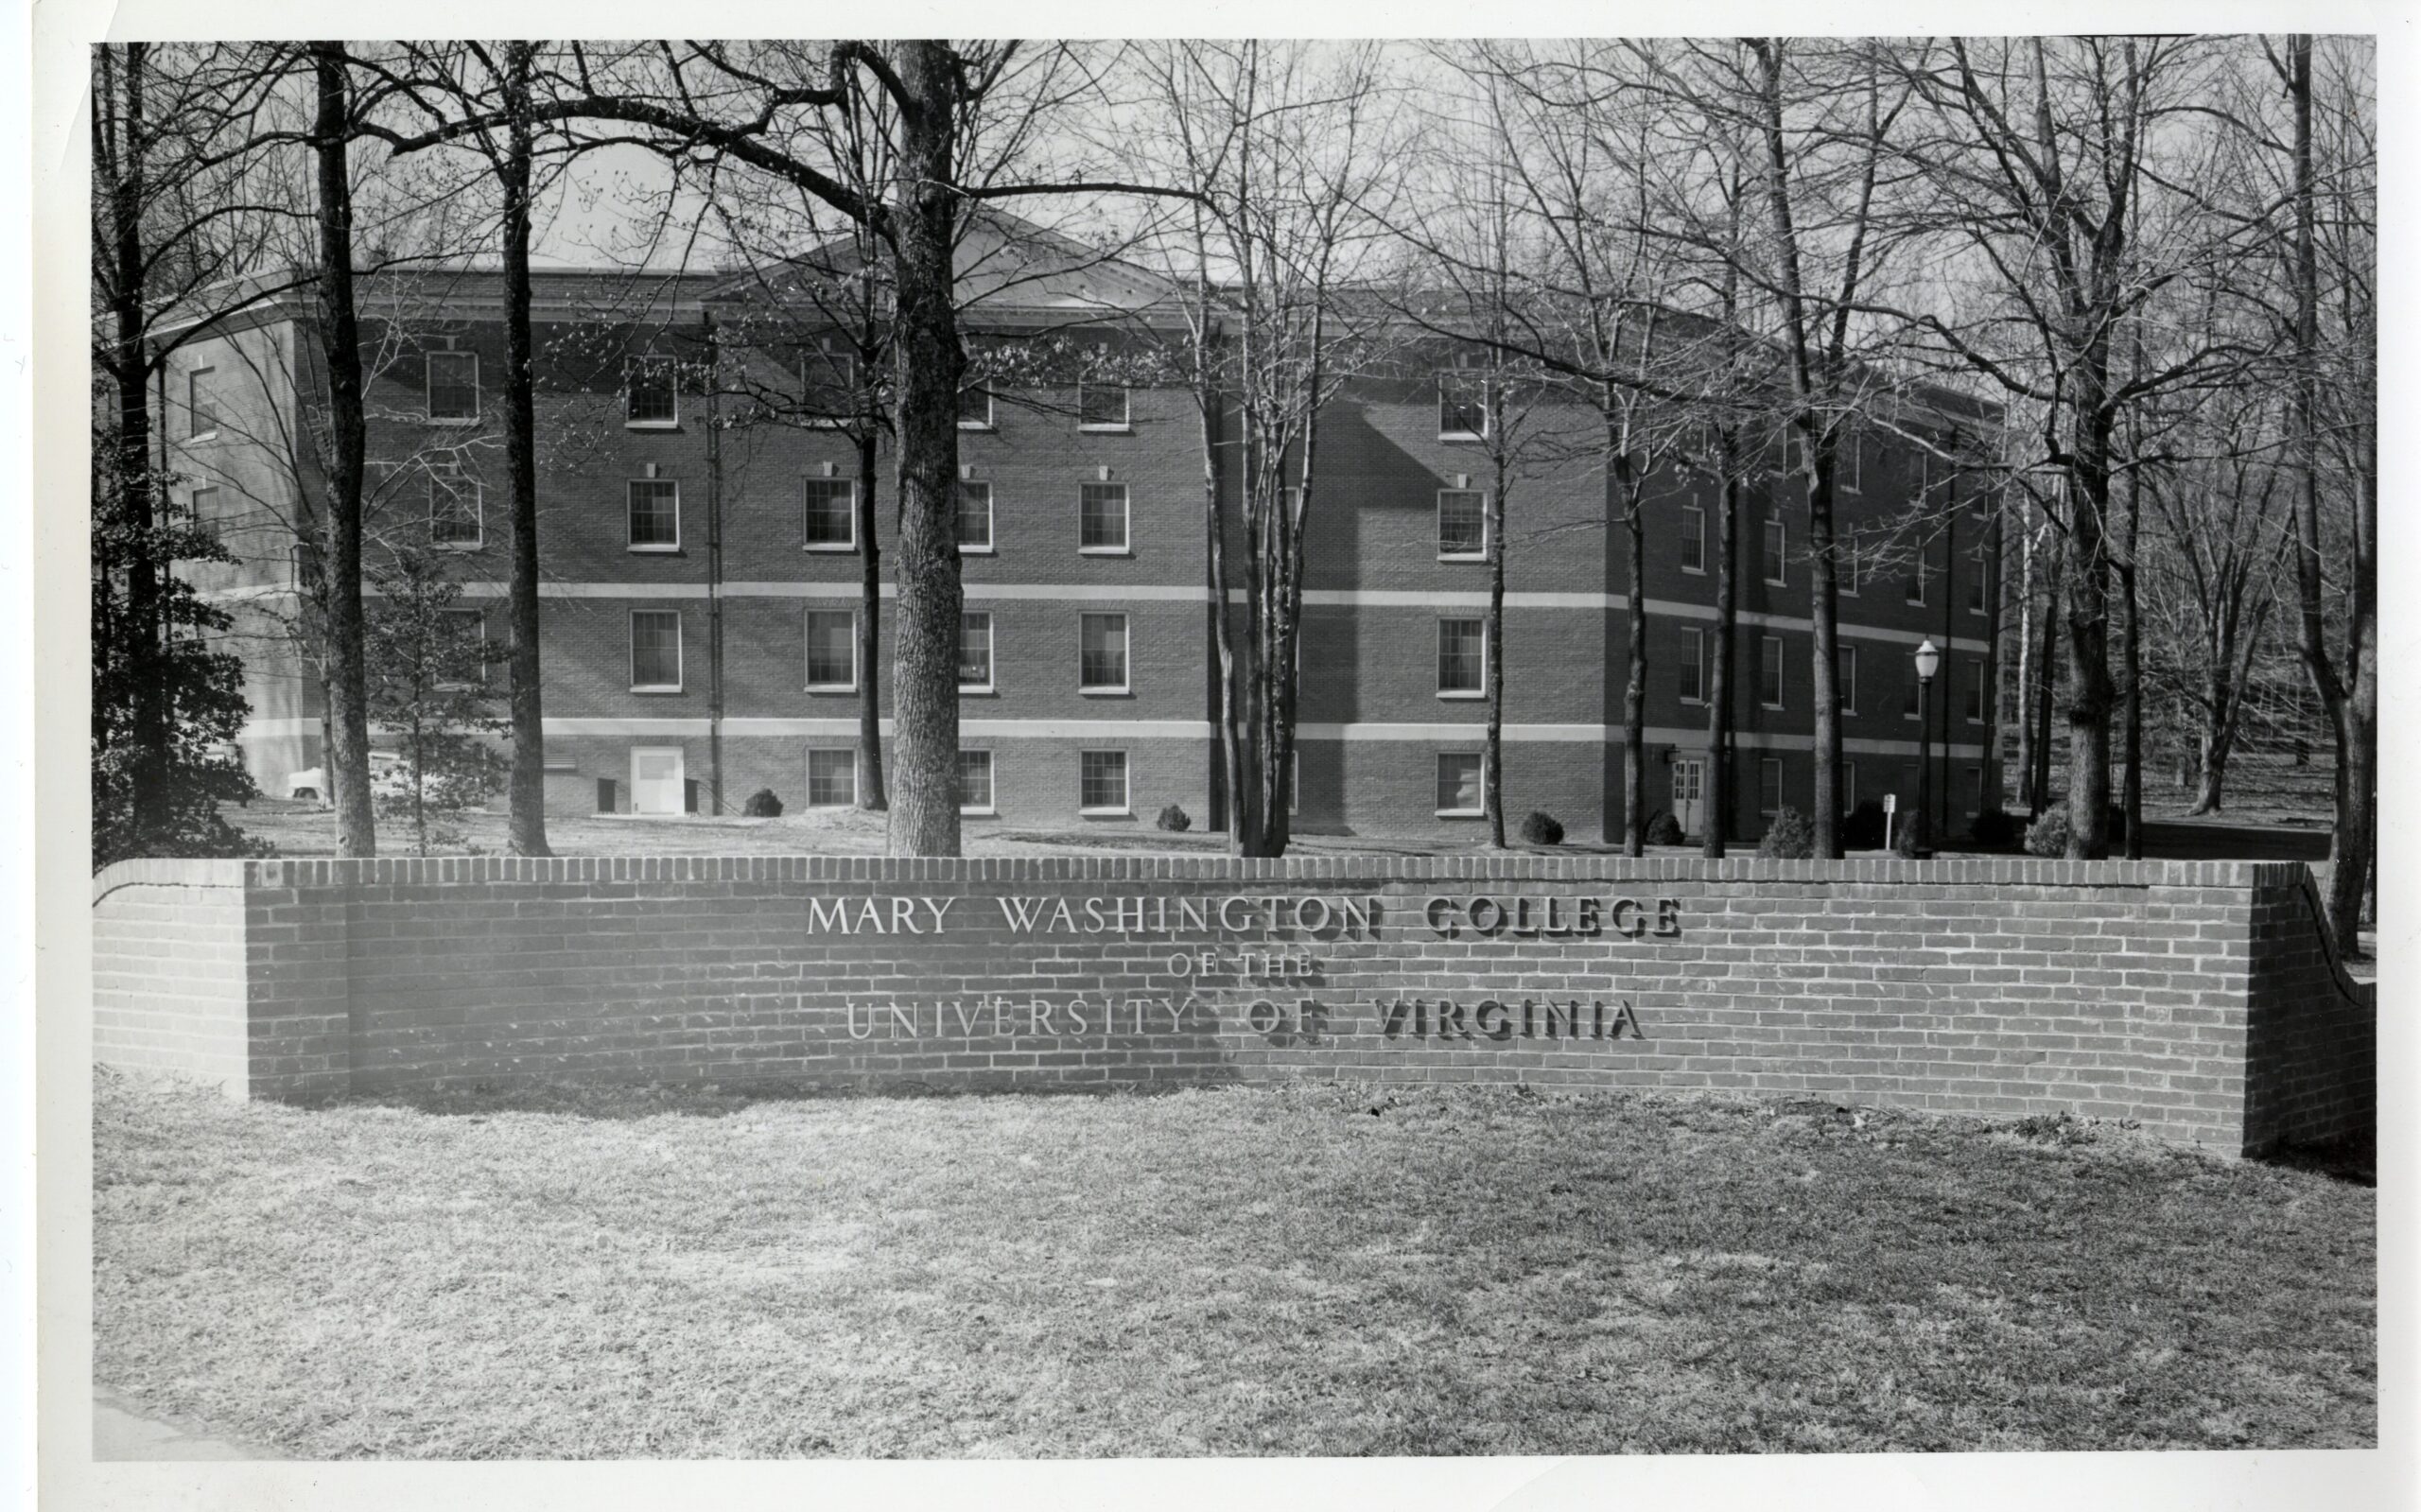 A black and white photo of a curved brick sign Marshall hall standing in the background. The sign reads "Mary Washington College of the University of Virginia."